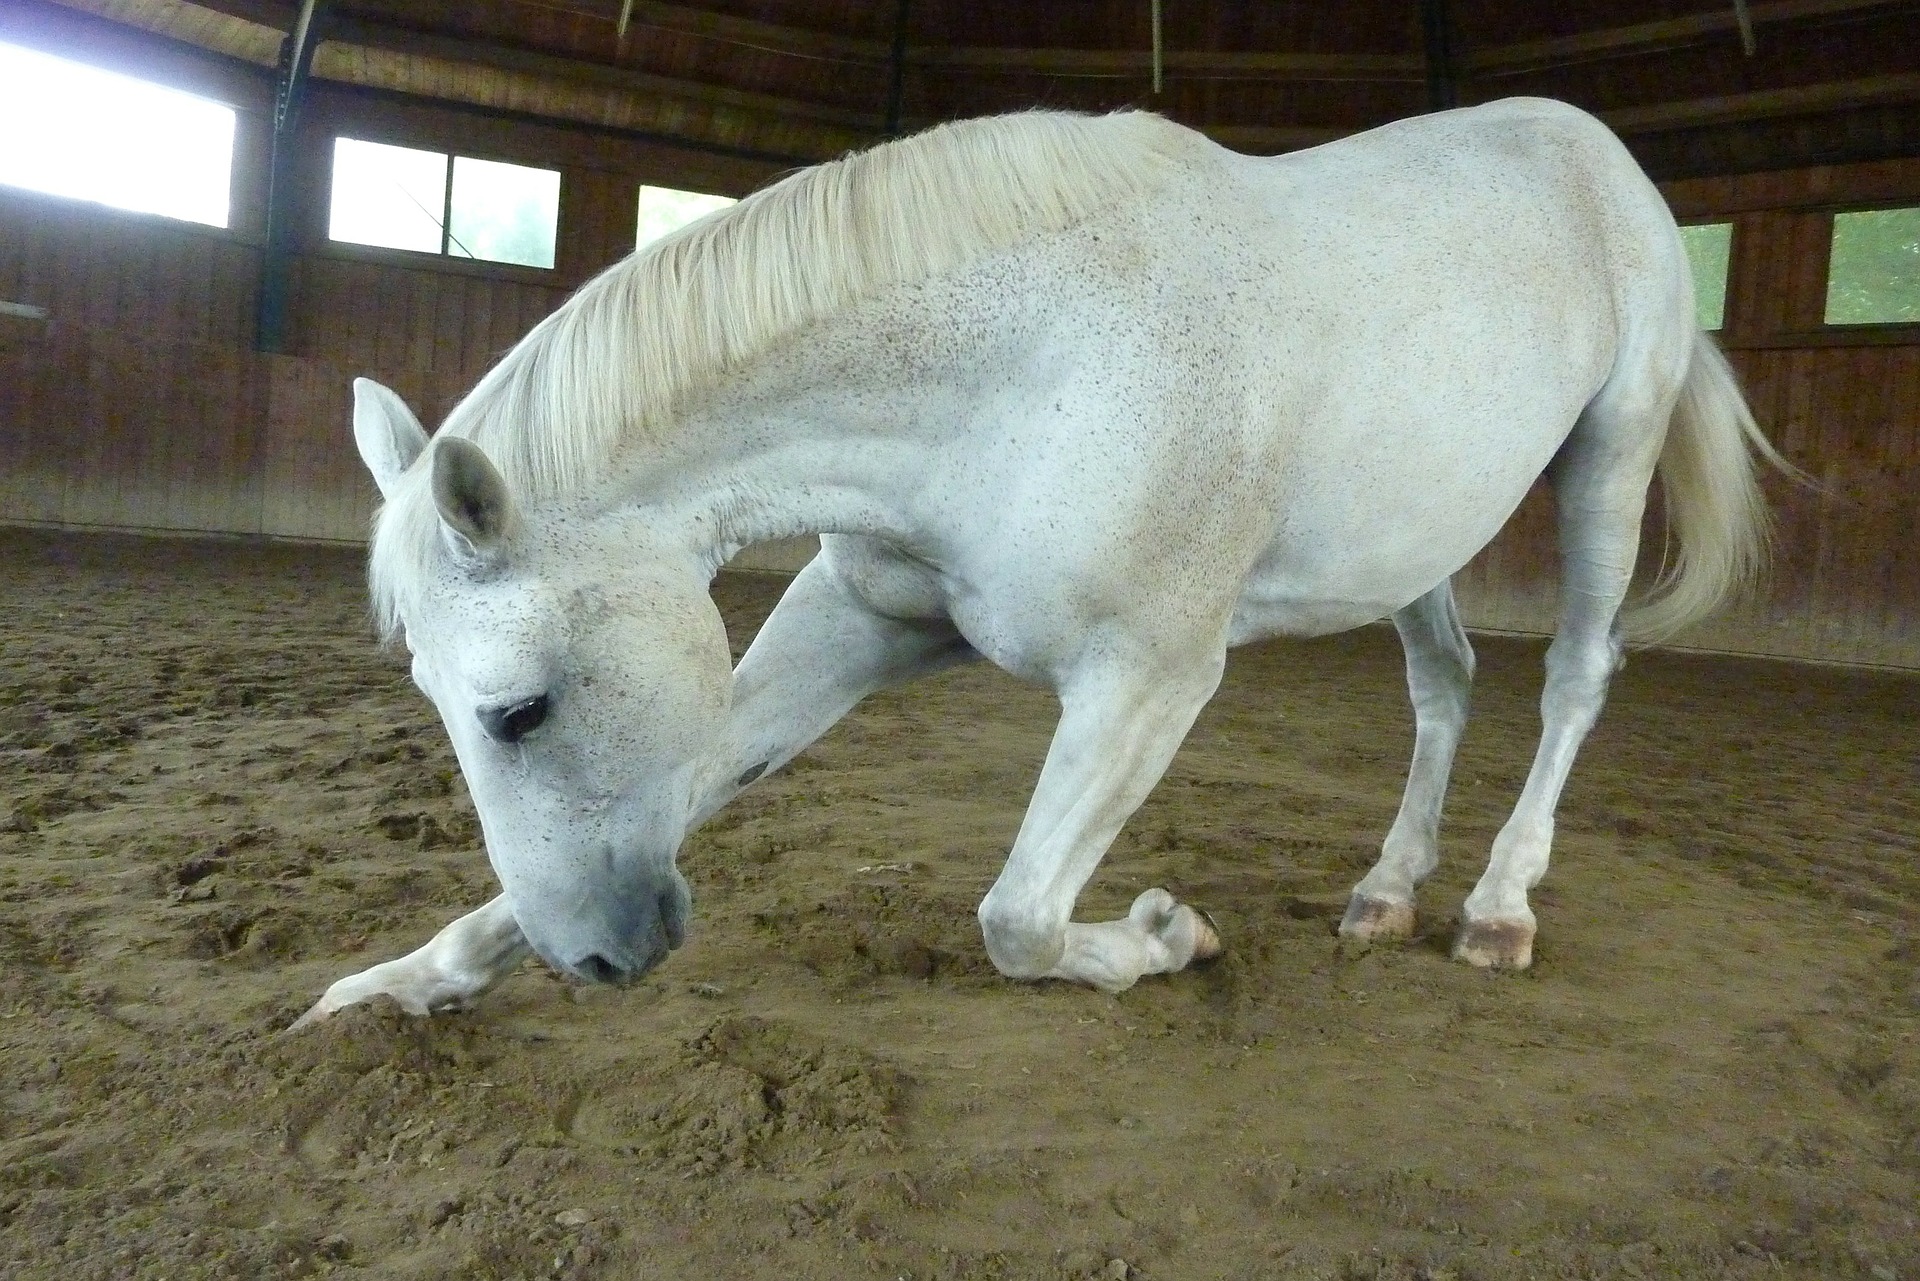 Horse doing ankle mobilization exercises